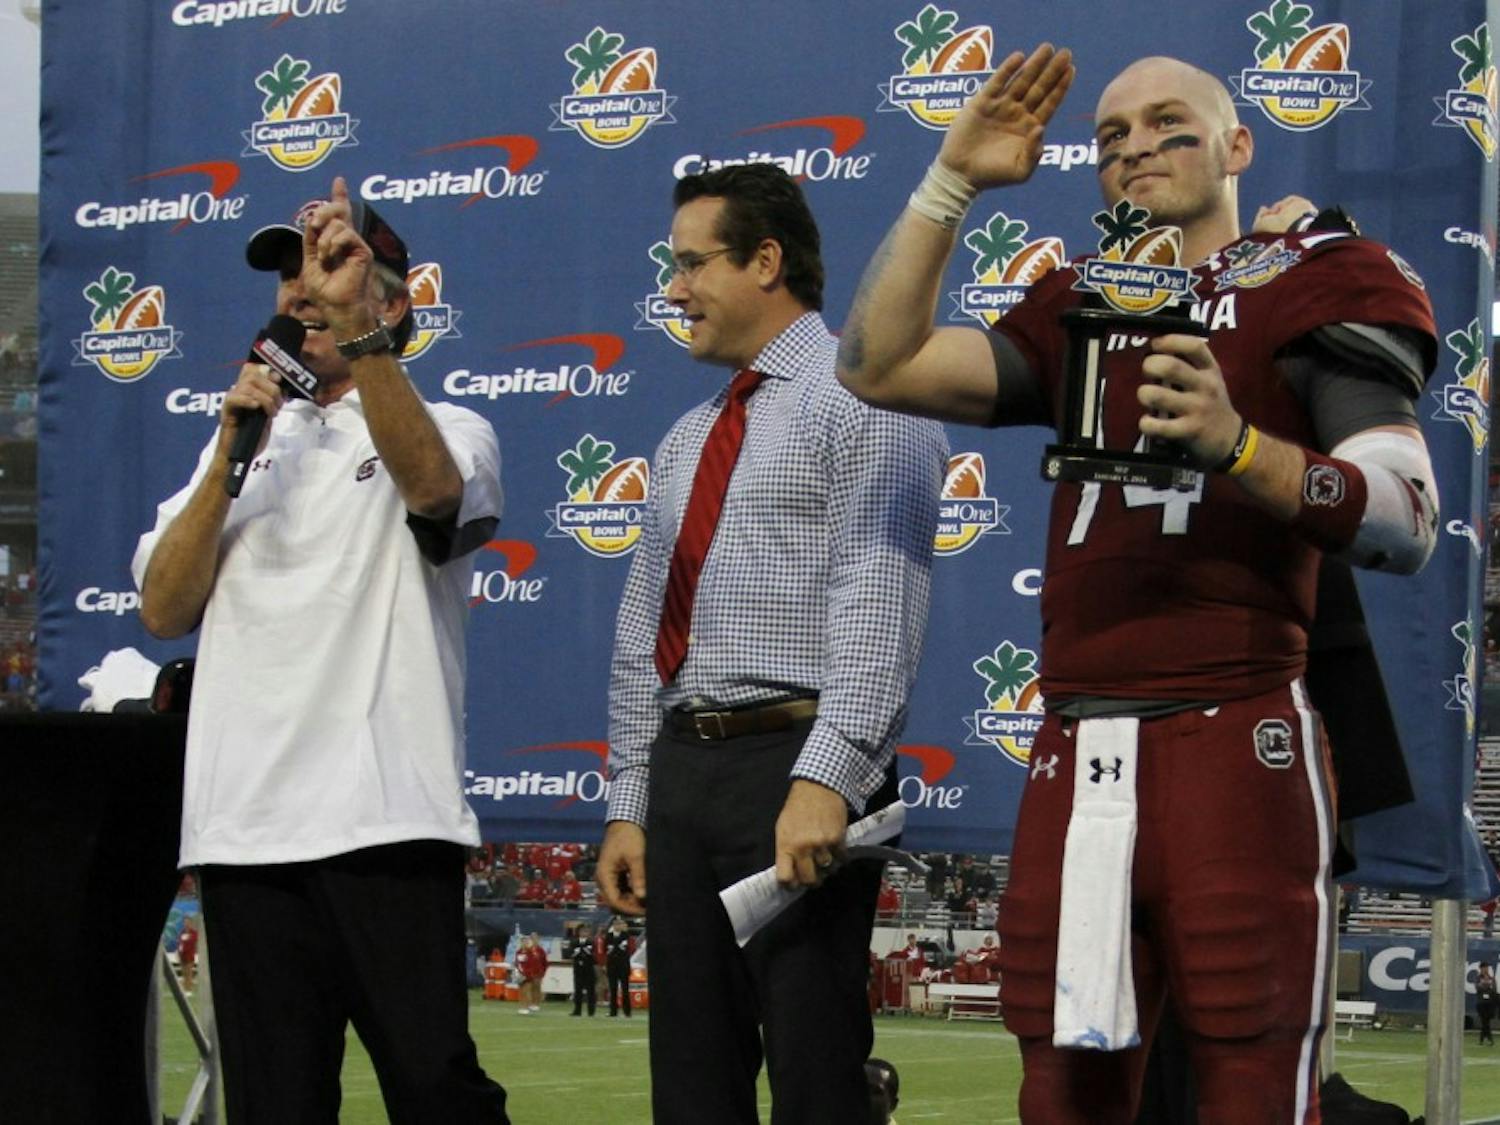 	Senior quarterback Connor Shaw is named the most valuable player at the Capital One Bowl on Jan. 1.